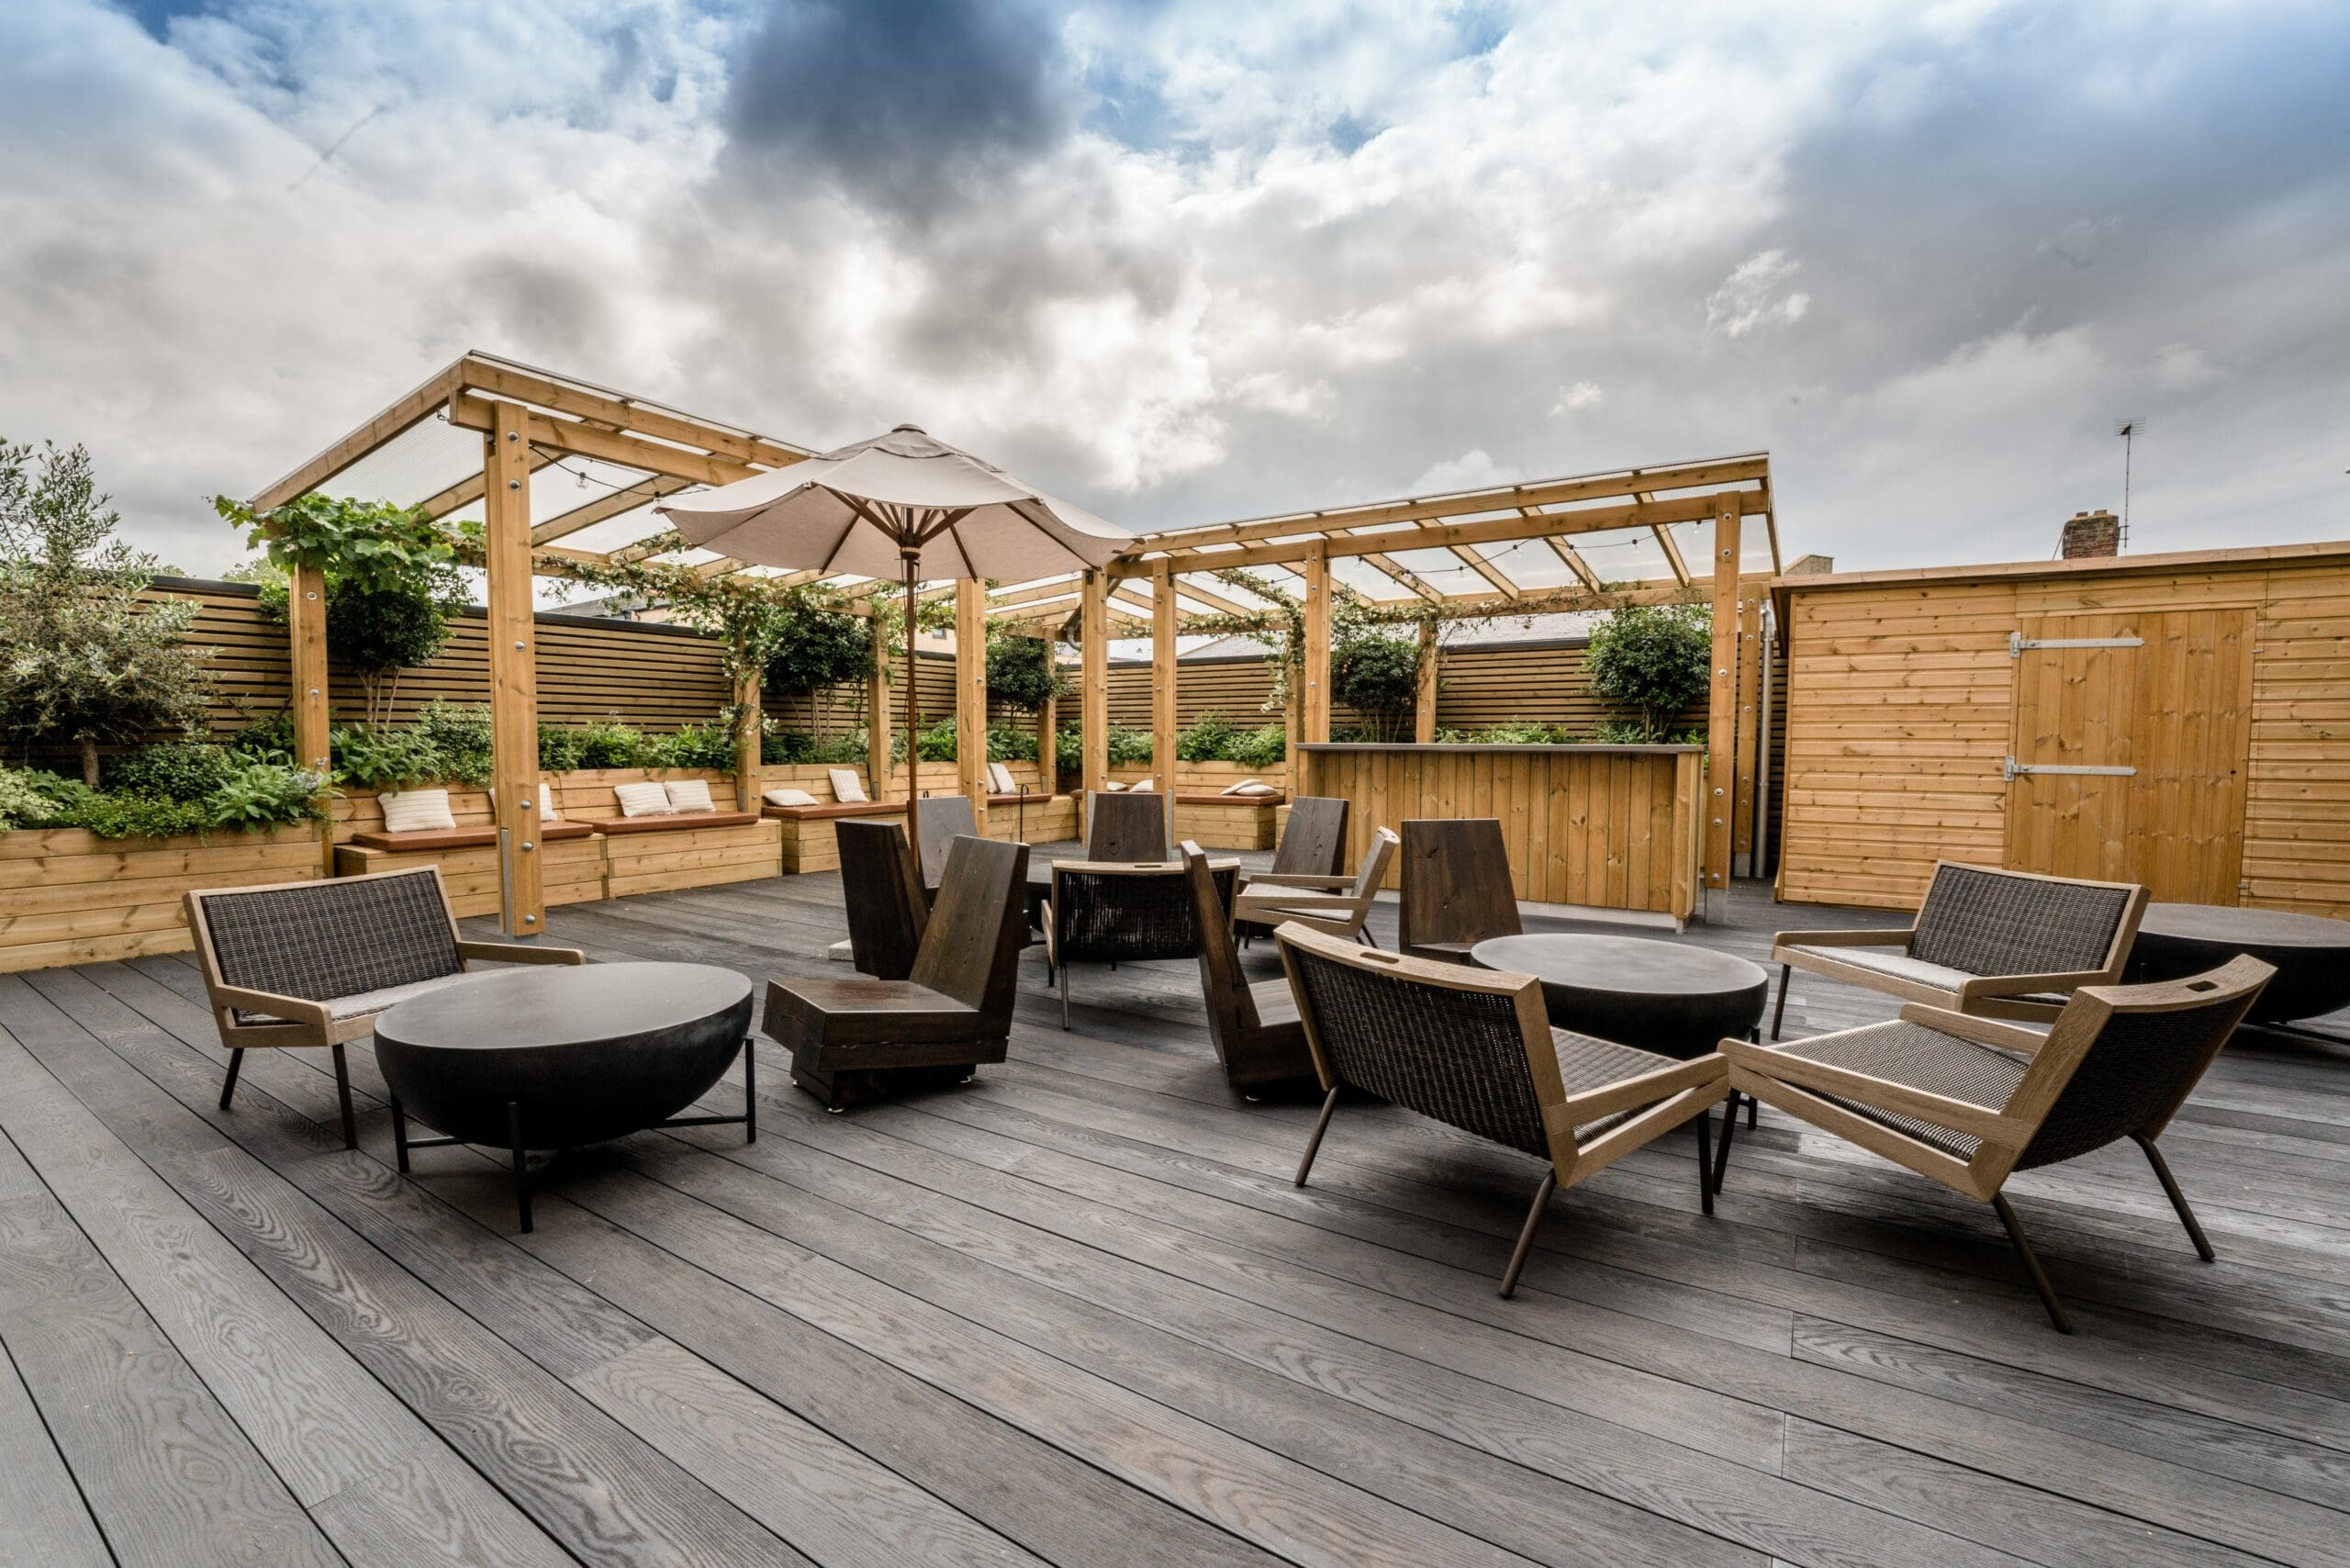 wide shot of wooden bespoke pergolas with built in benches in the background and other outdoor furniture in the foreground